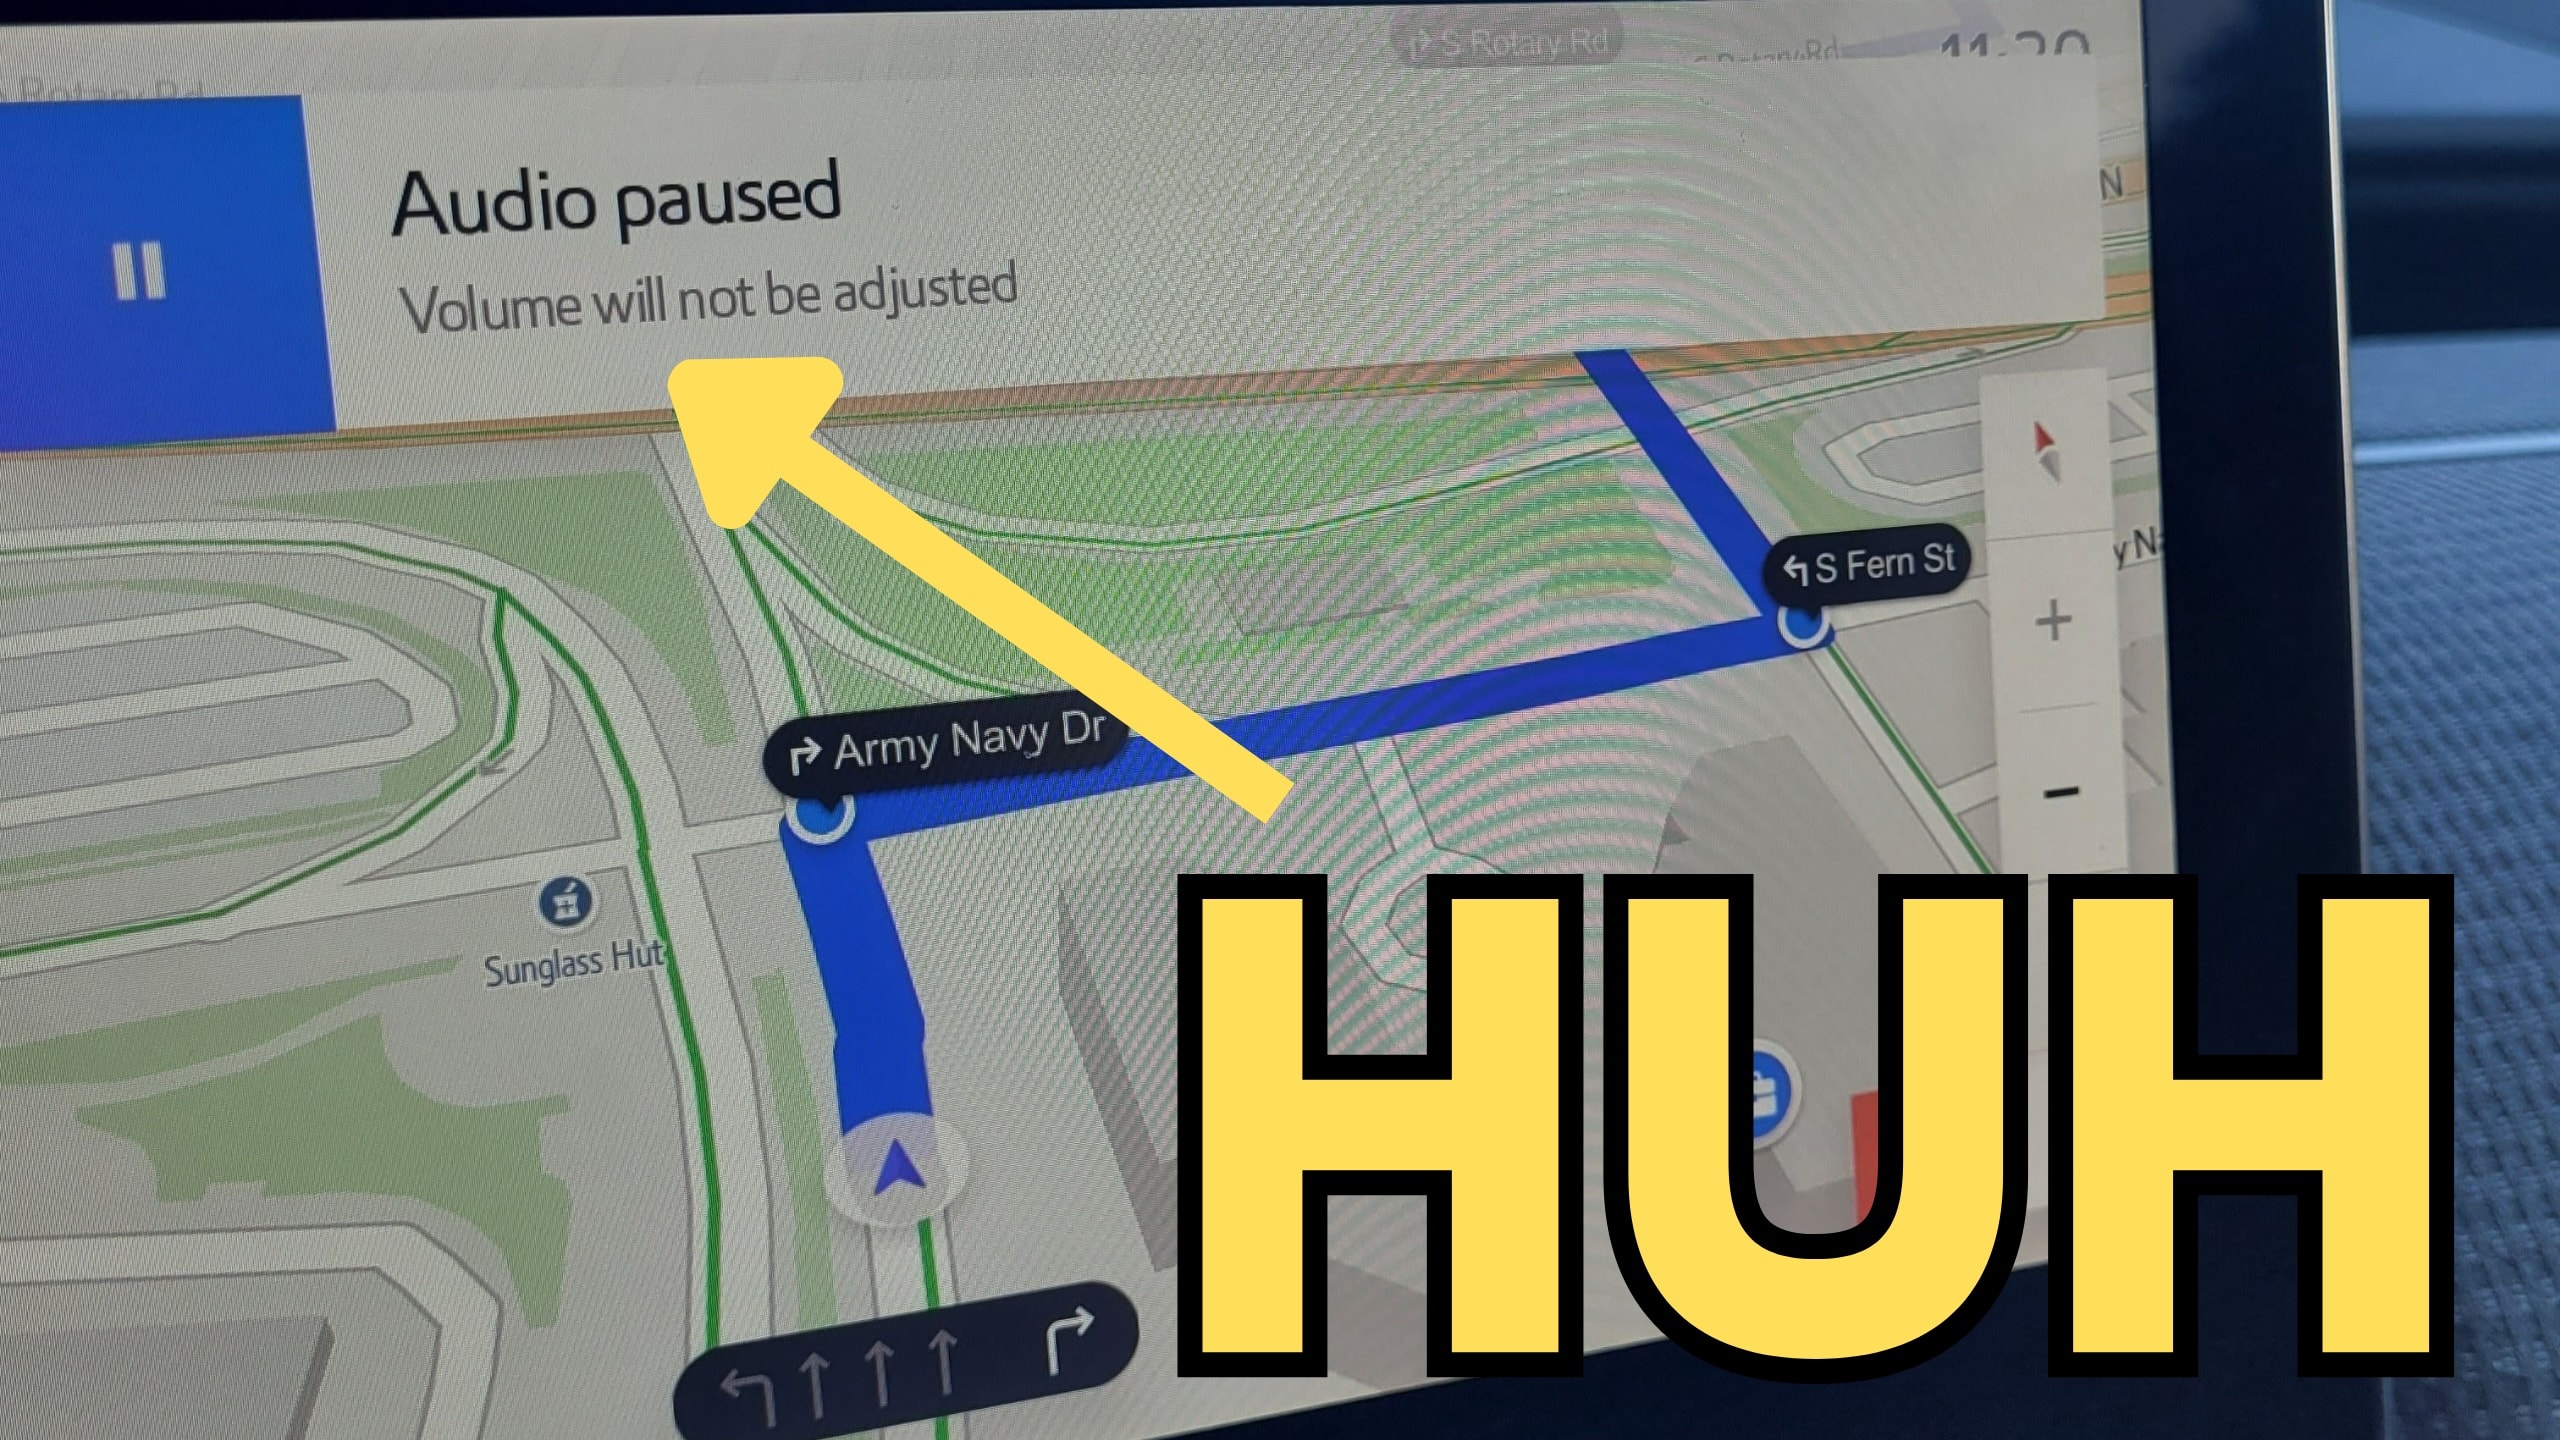 You Can’t Make This Up: Android Auto Now Disables Volume Controls